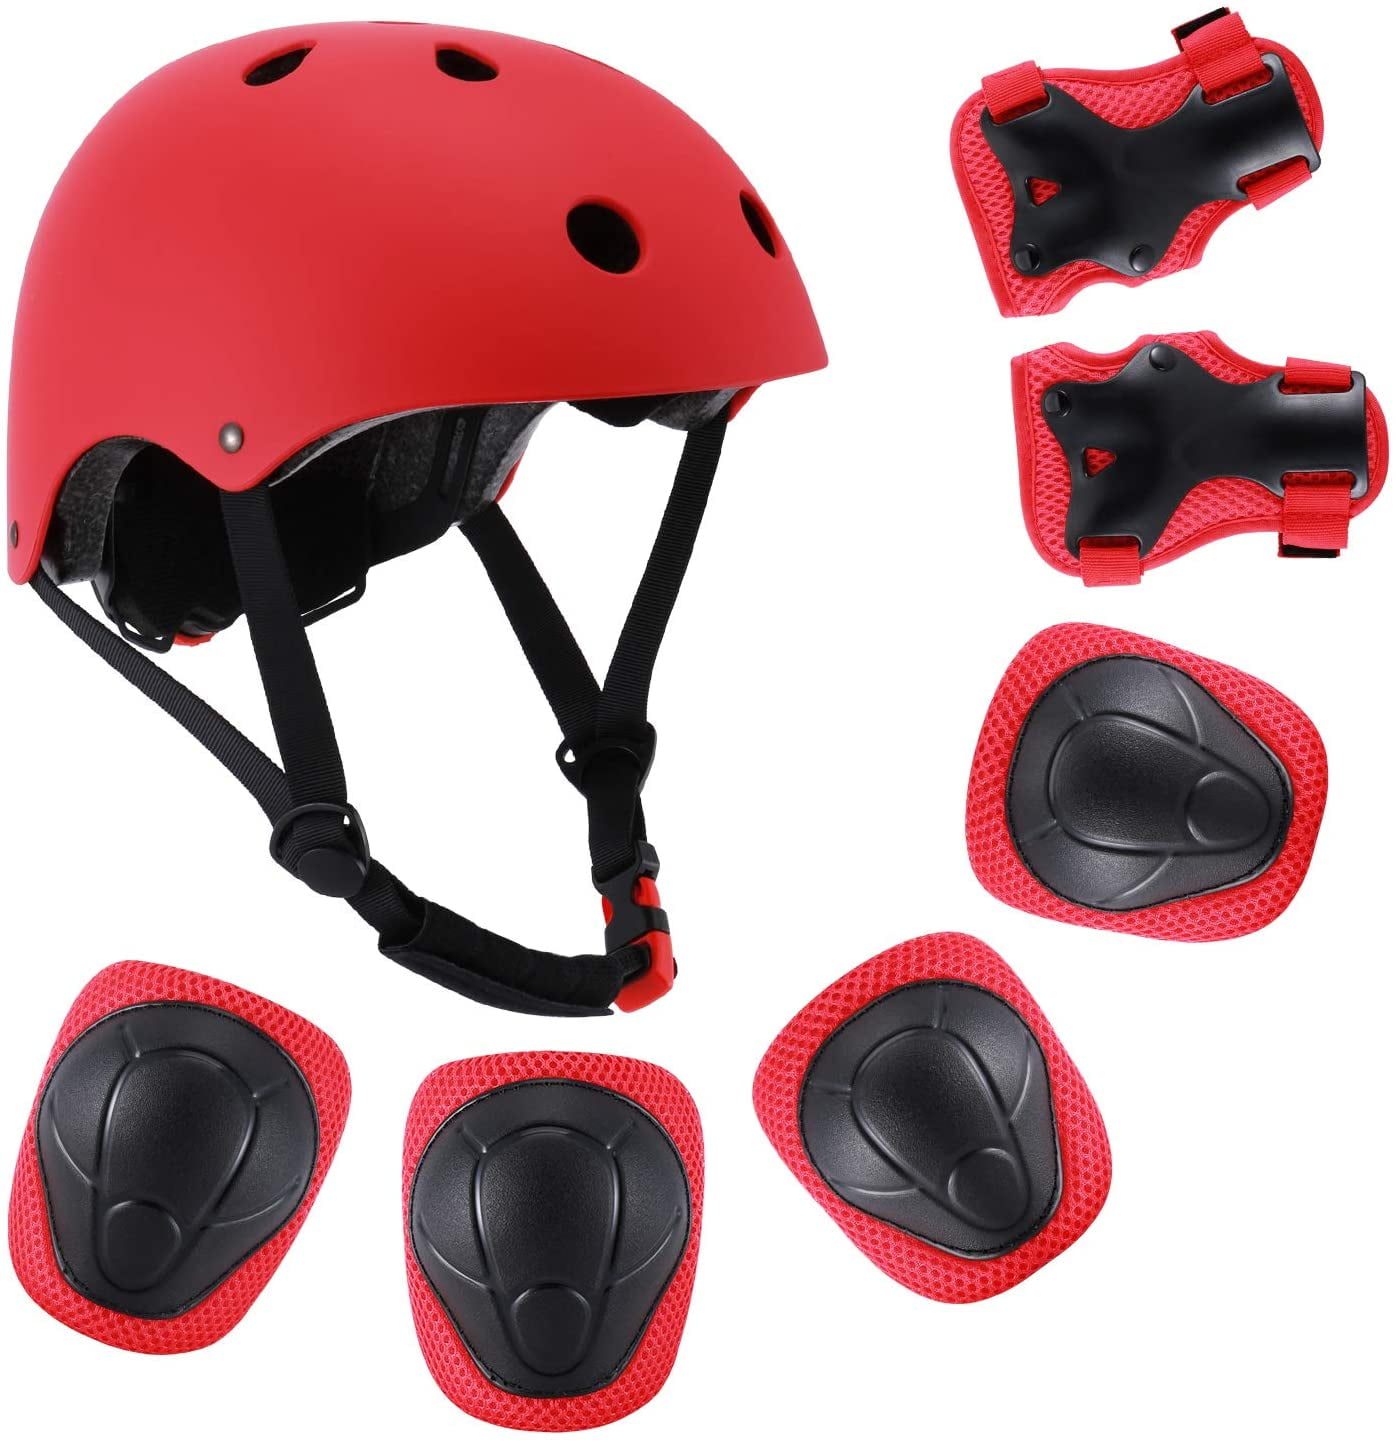 Protective Gear Outfit Kid Helmet Knee Wrist Guard Elbow Pad for Skating Cycling 